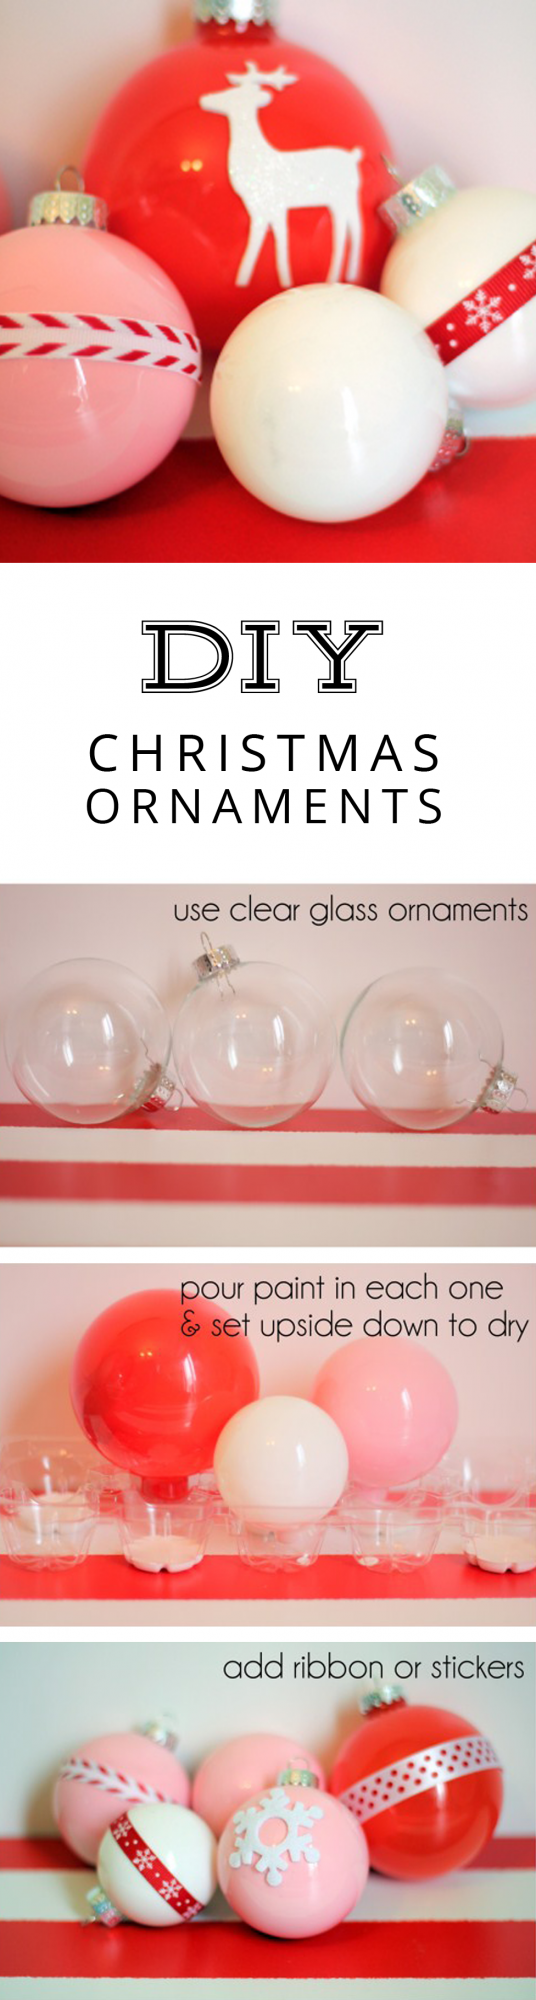 With a little paint and some stickers, you can make your own DIY ornaments to suit your a Christmas decor scheme of your choice! They're easy and frugal. | Holidays | Crafts | YummyMummyClub.ca